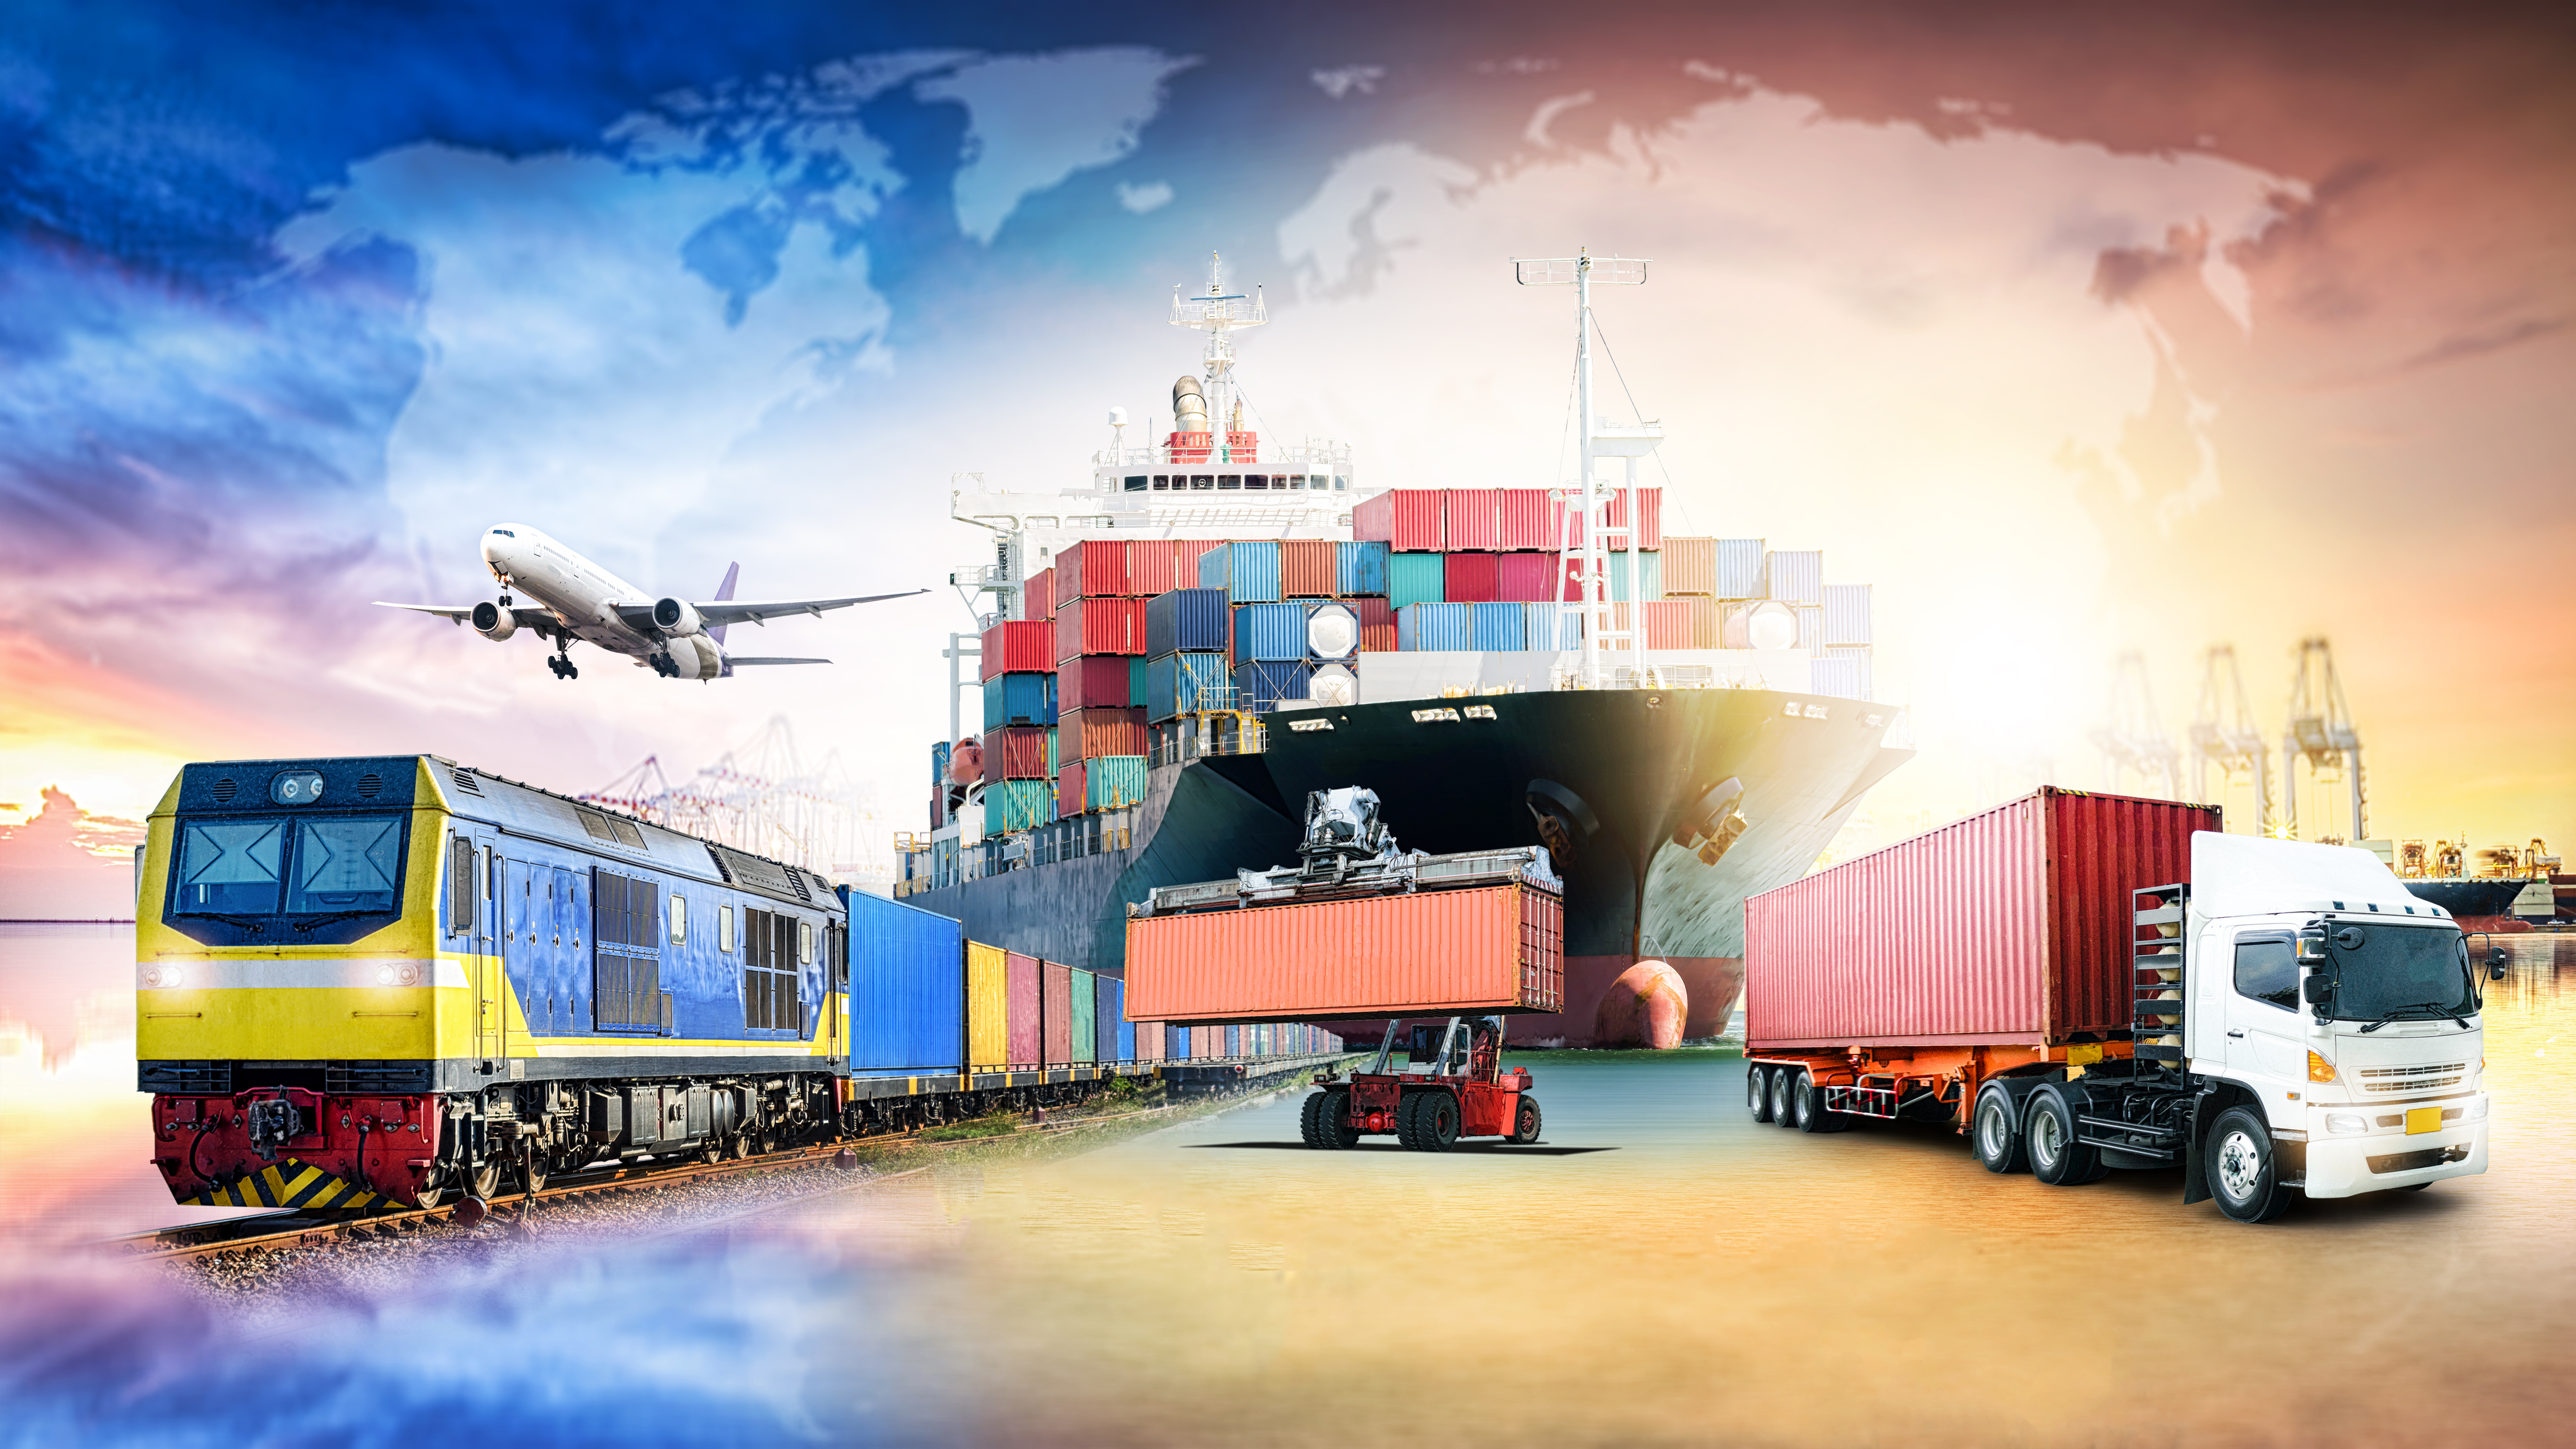 Global business logistics import export background and container cargo freight ship transport concept Image